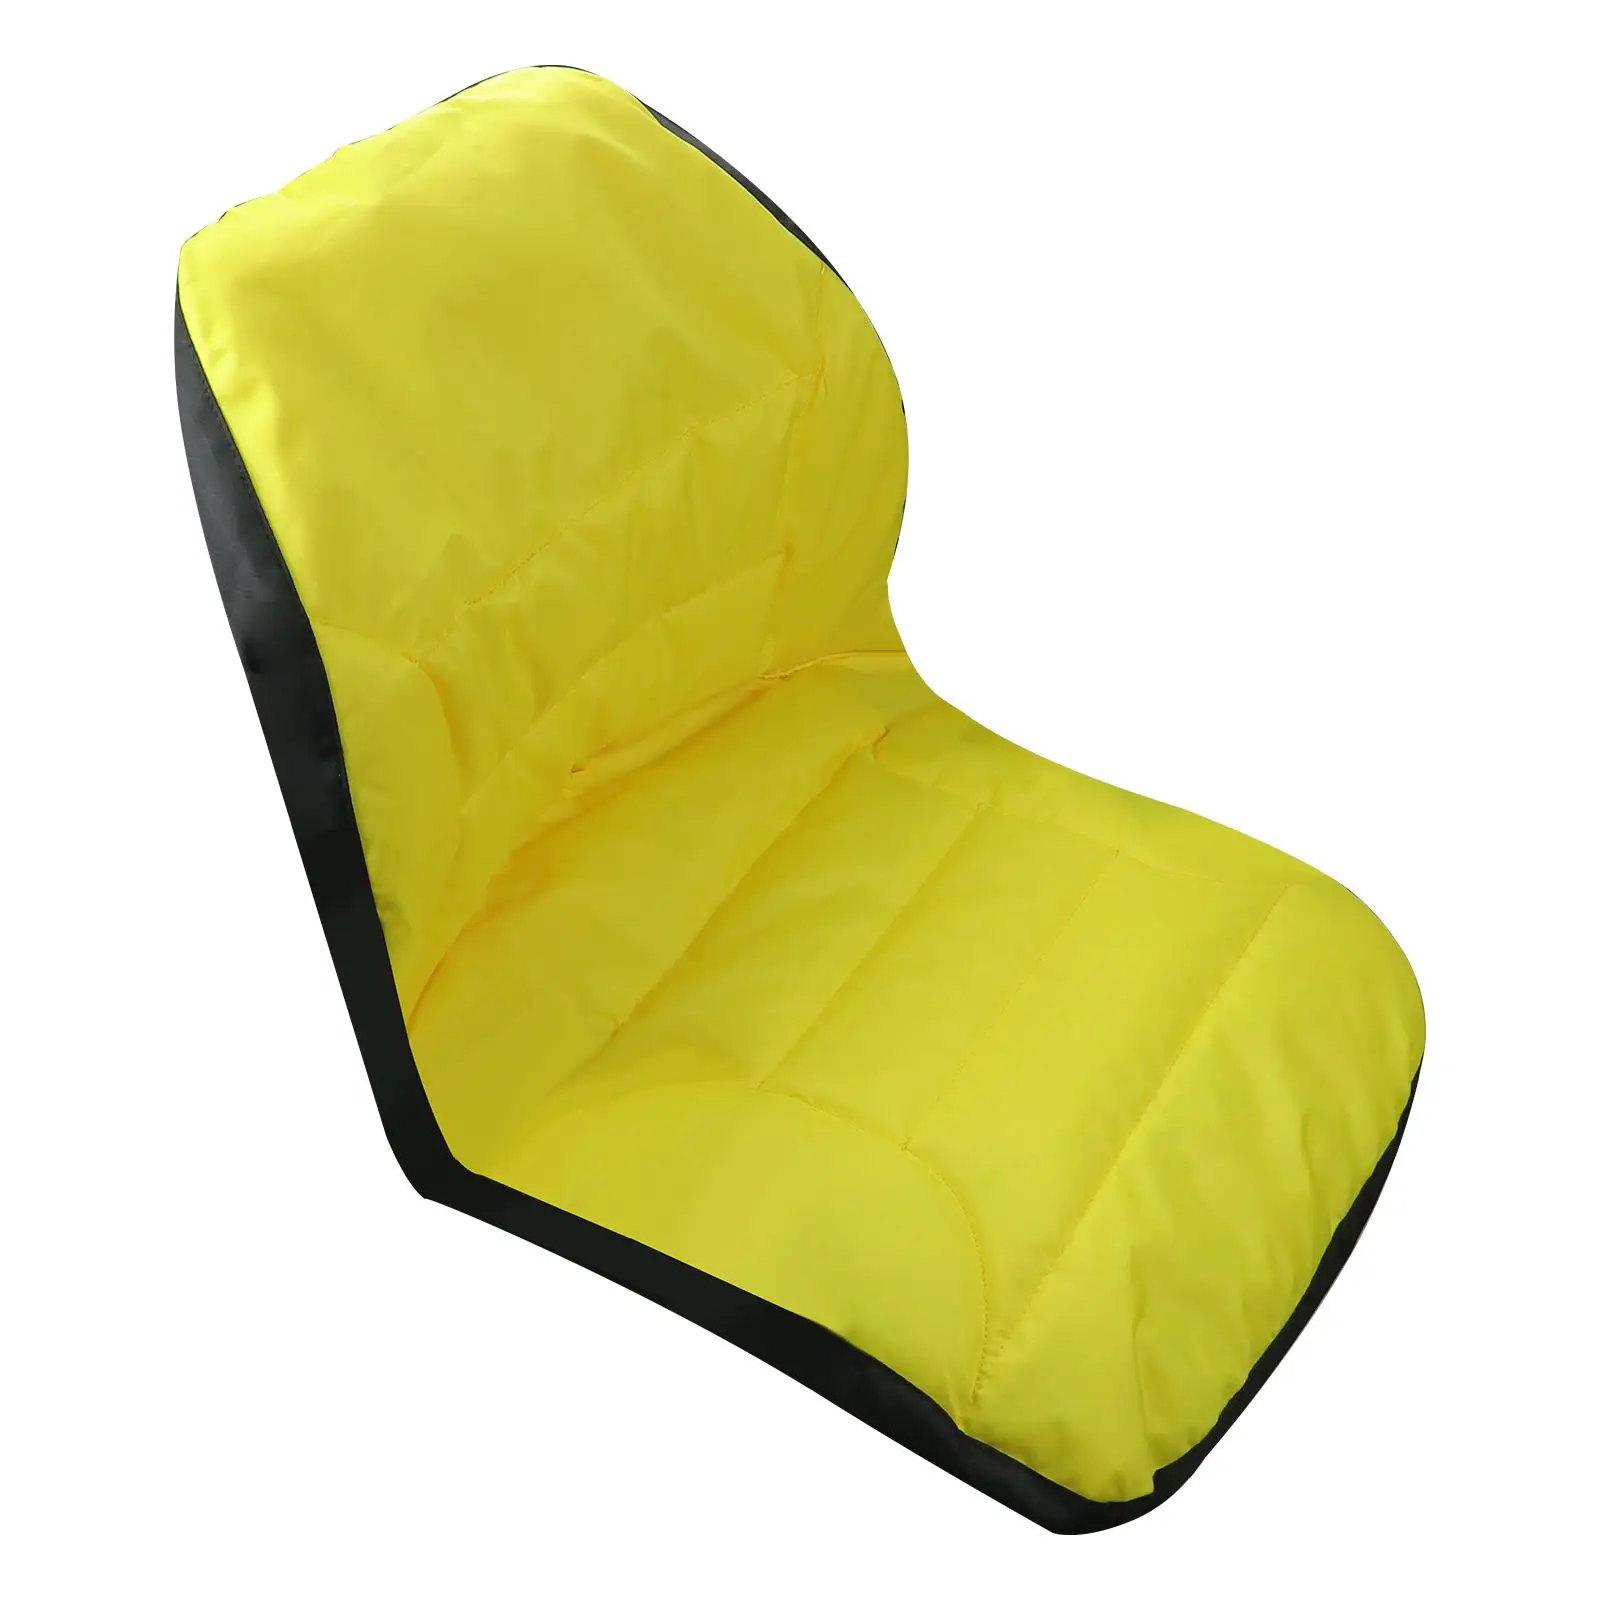 Tractor Seat Cover LP68694 Utility Fittings Compact Rope Pulling Large Weatherproof Replaces Accessory for John Deere 2025R